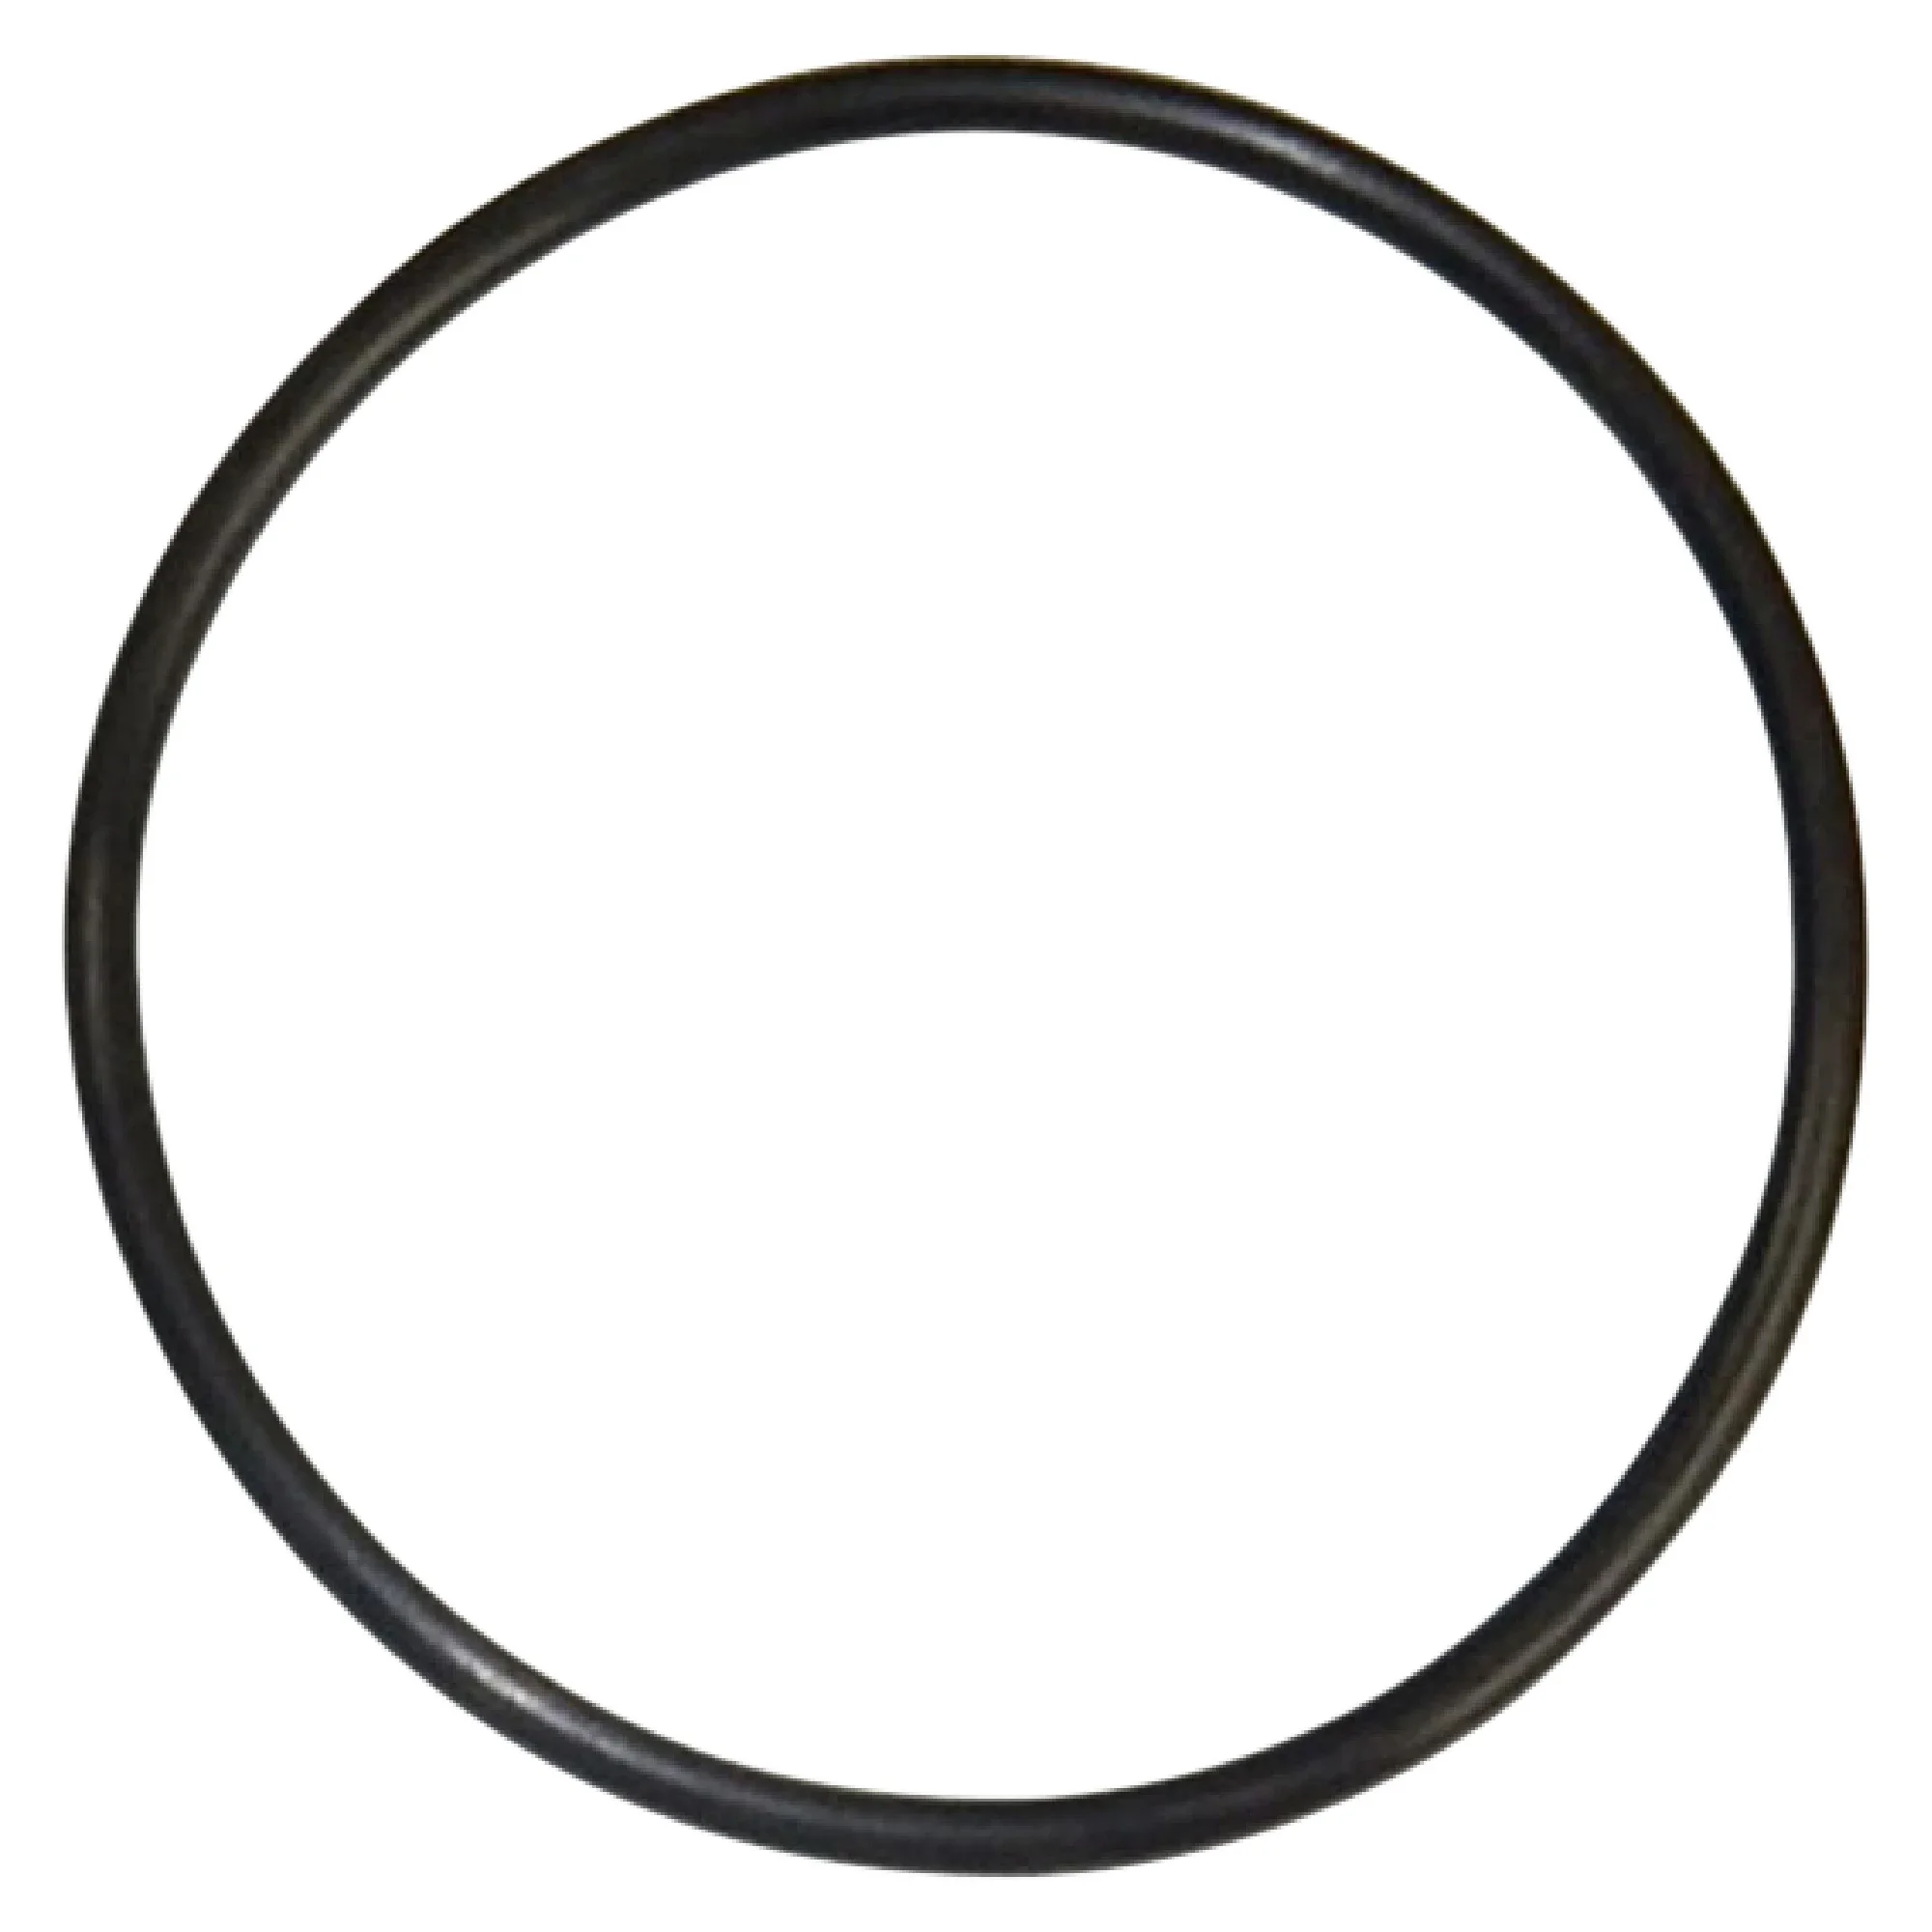 Wastebuilt® Replacement for McNeilus O-Ring,40 Split Flange